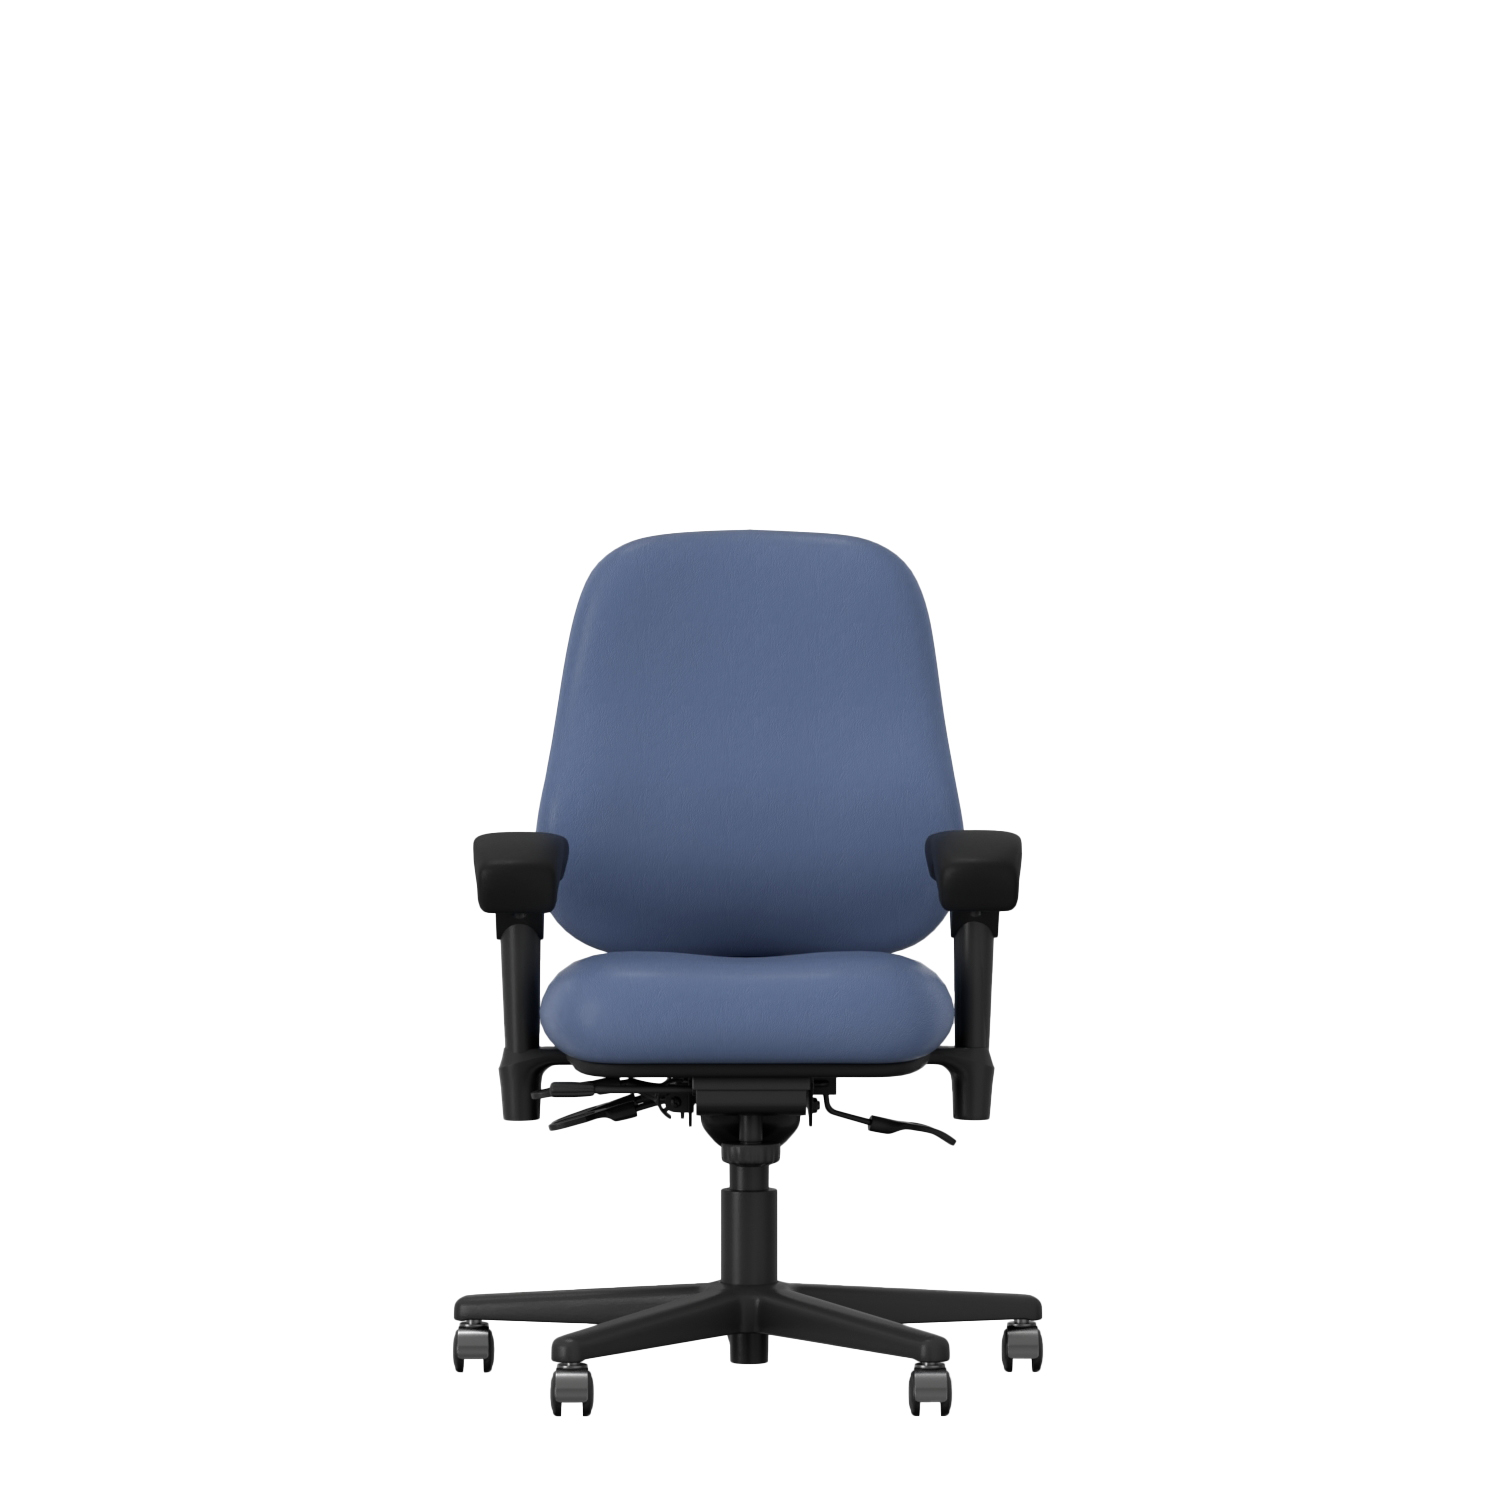 NEXT24 2400 – Intensive Use Series Chair